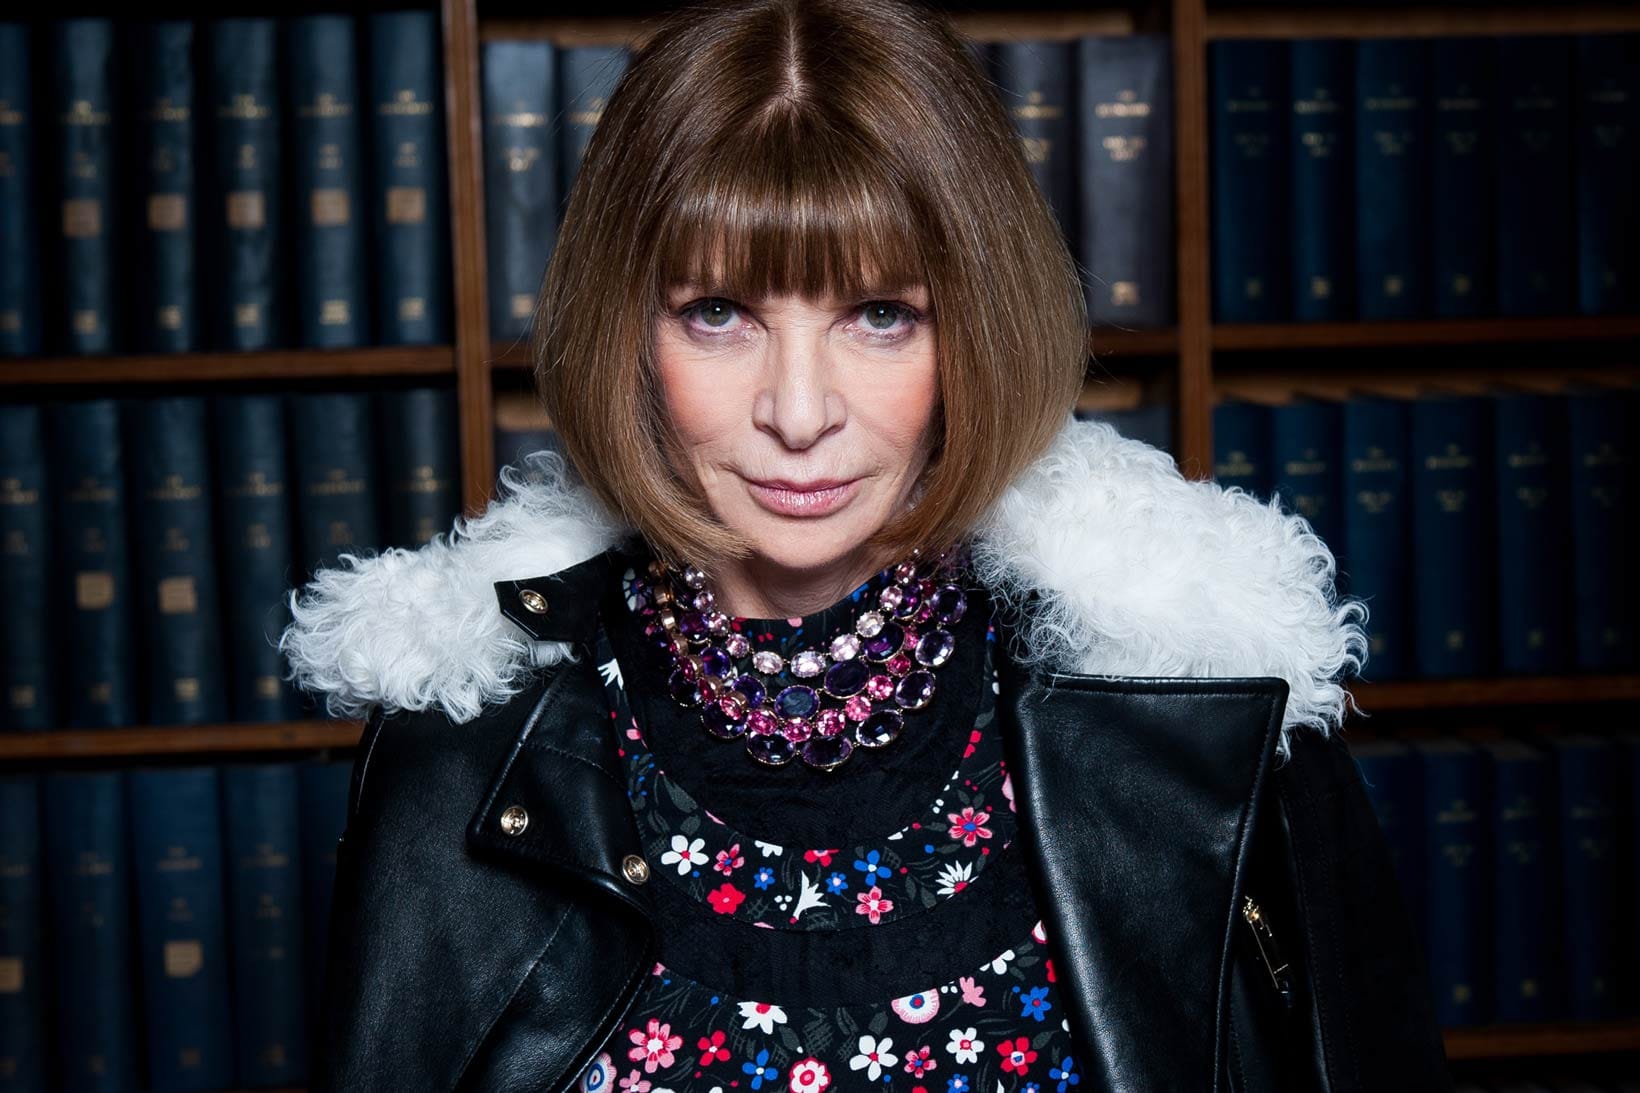 Anna Wintour kept sunglasses on while laying off staff claims former writer